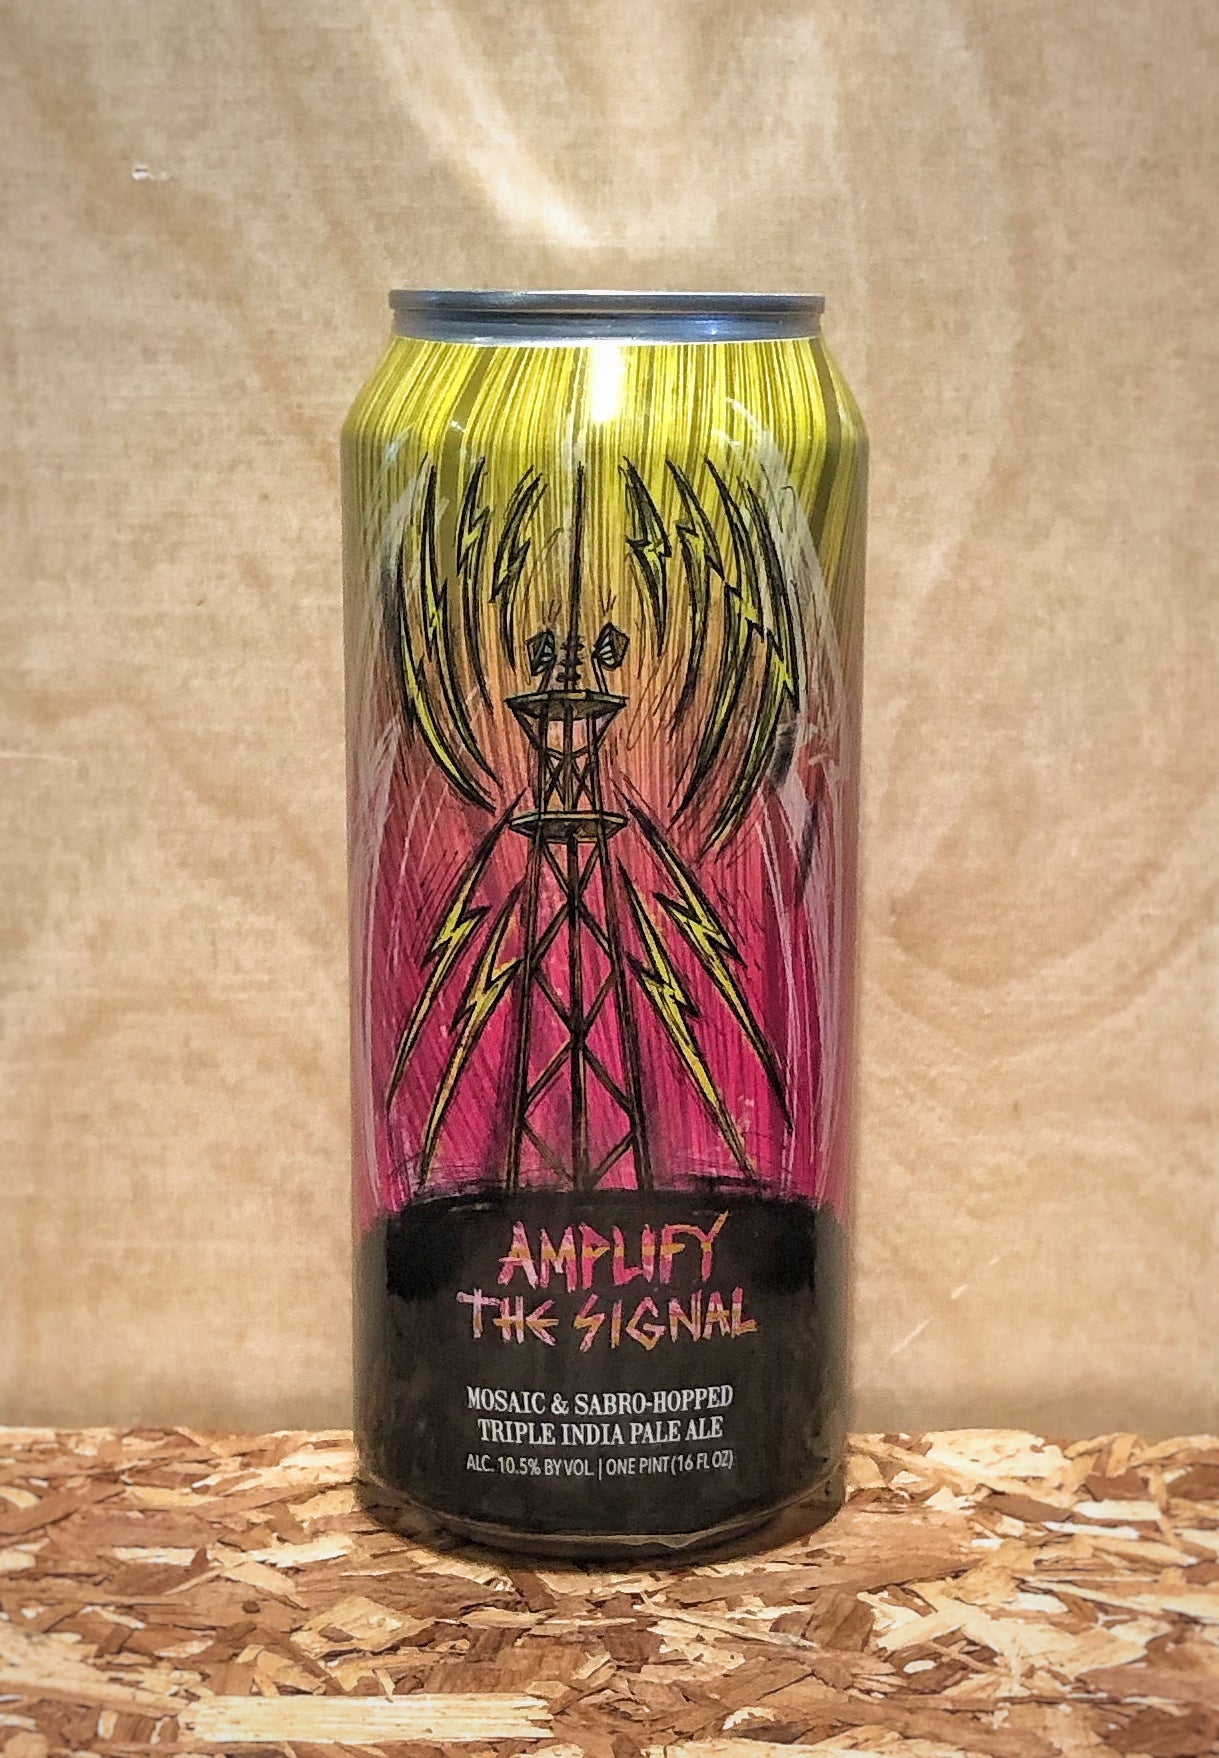 Hop Butcher For the World 'Amplify the Signal' Triple India Pale Ale (Chicago, IL)